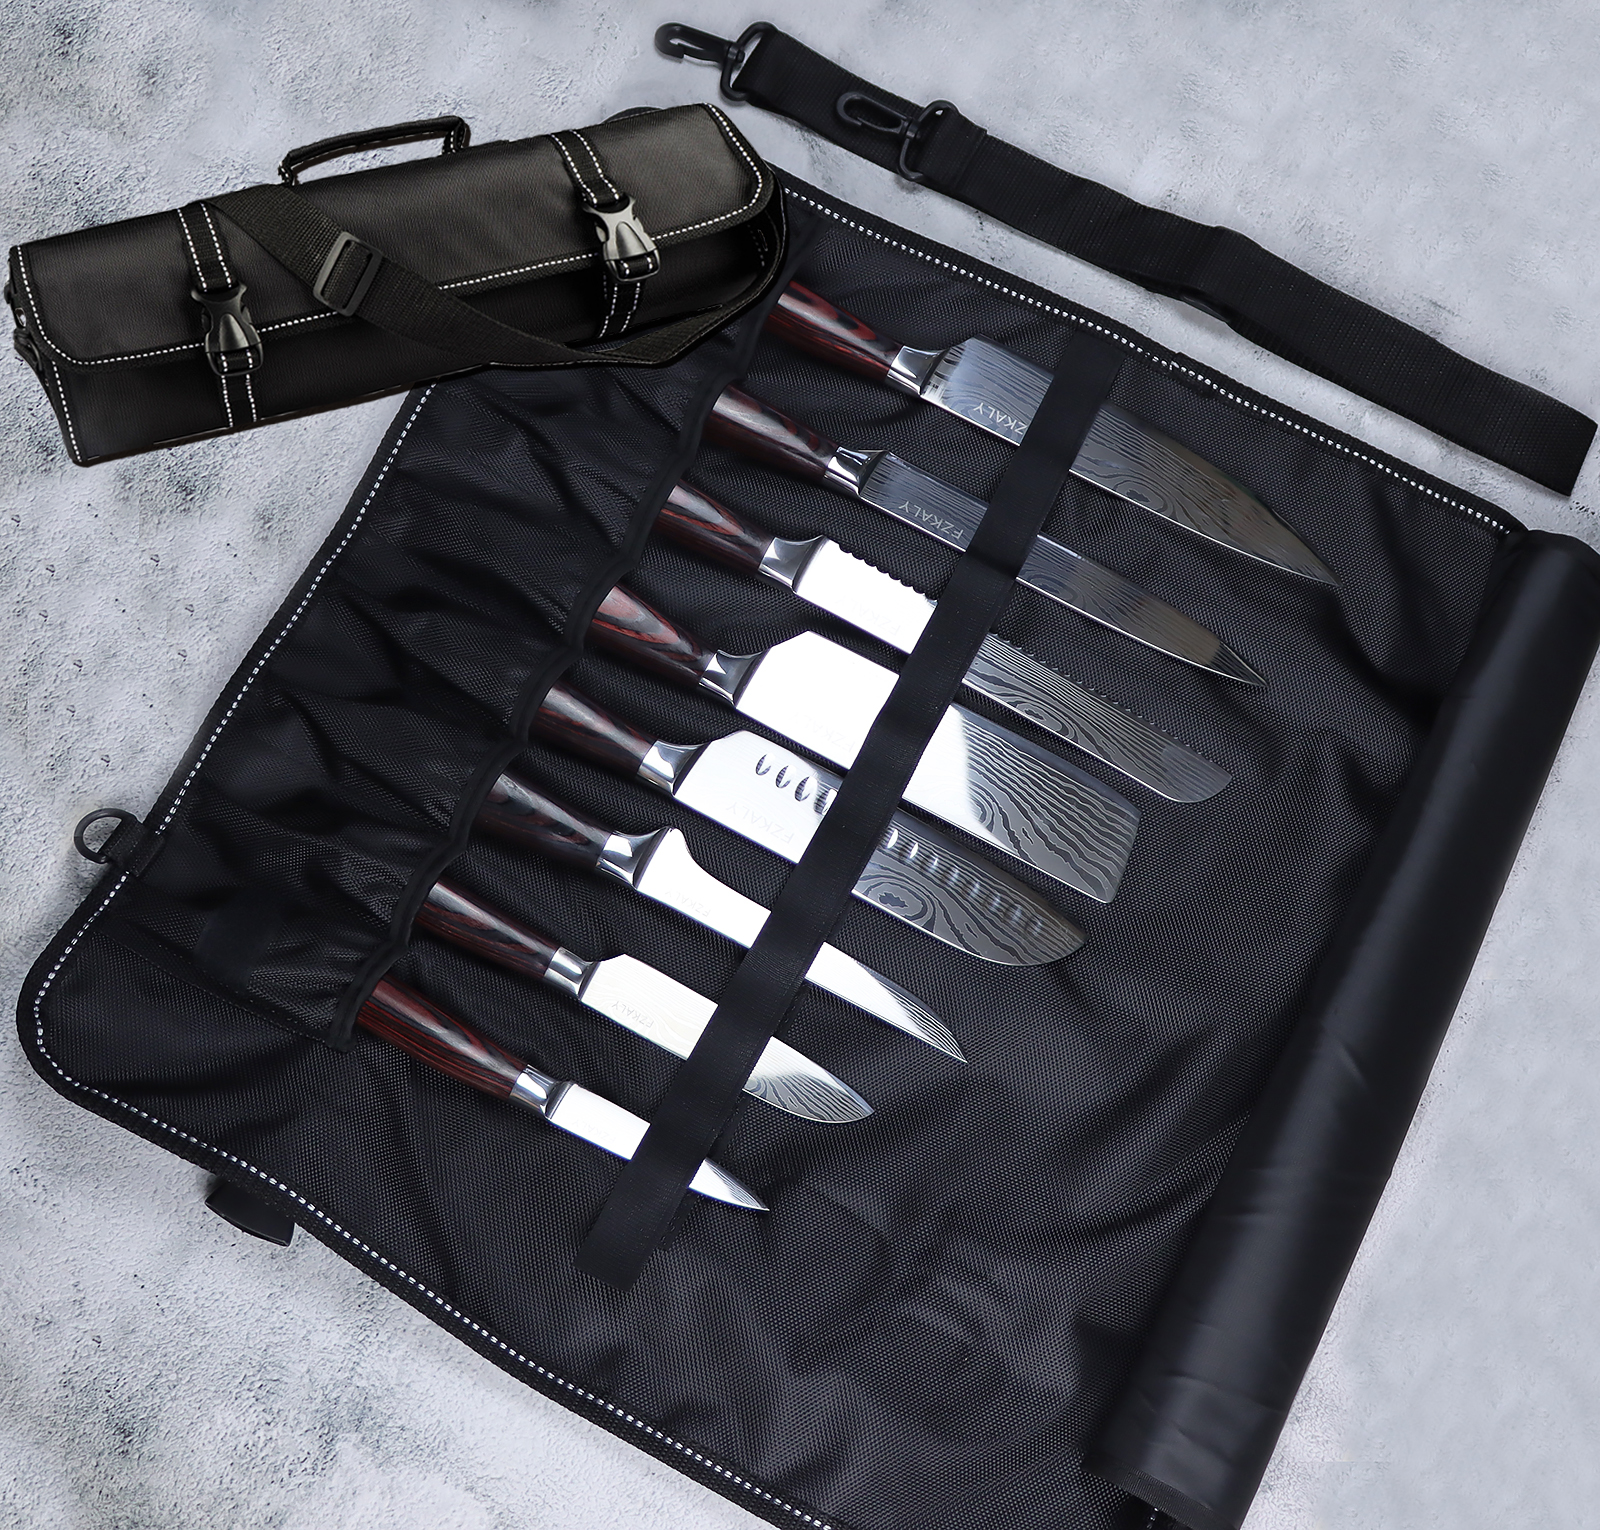 8-Piece Chef Knife Set With Roll Bag